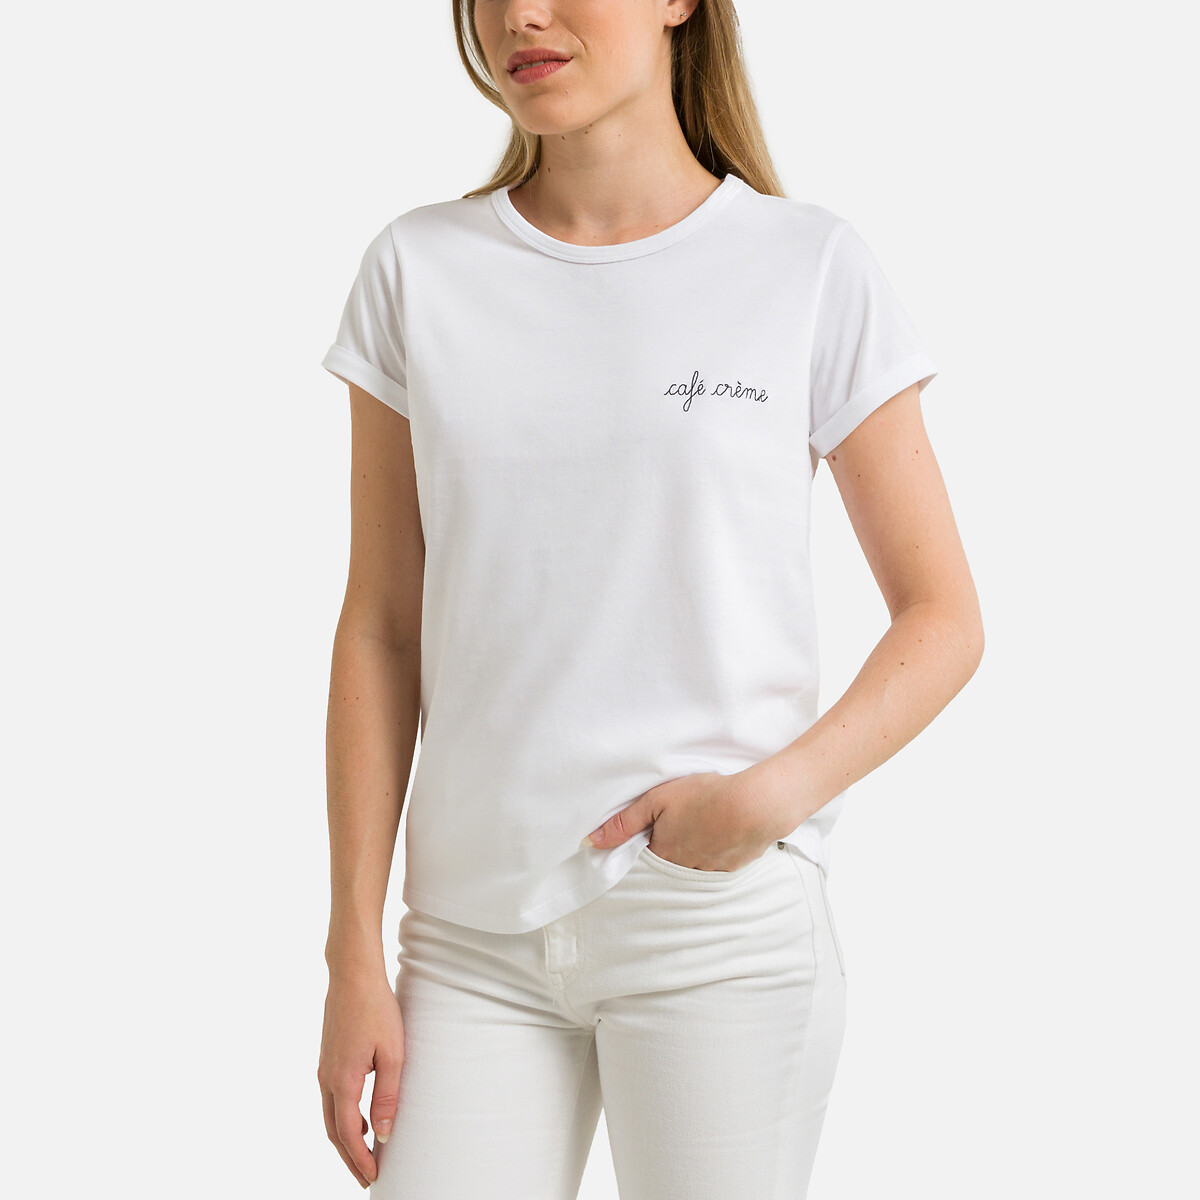 Poitou Organic Cotton T-Shirt with Crew Neck and Short Sleeves